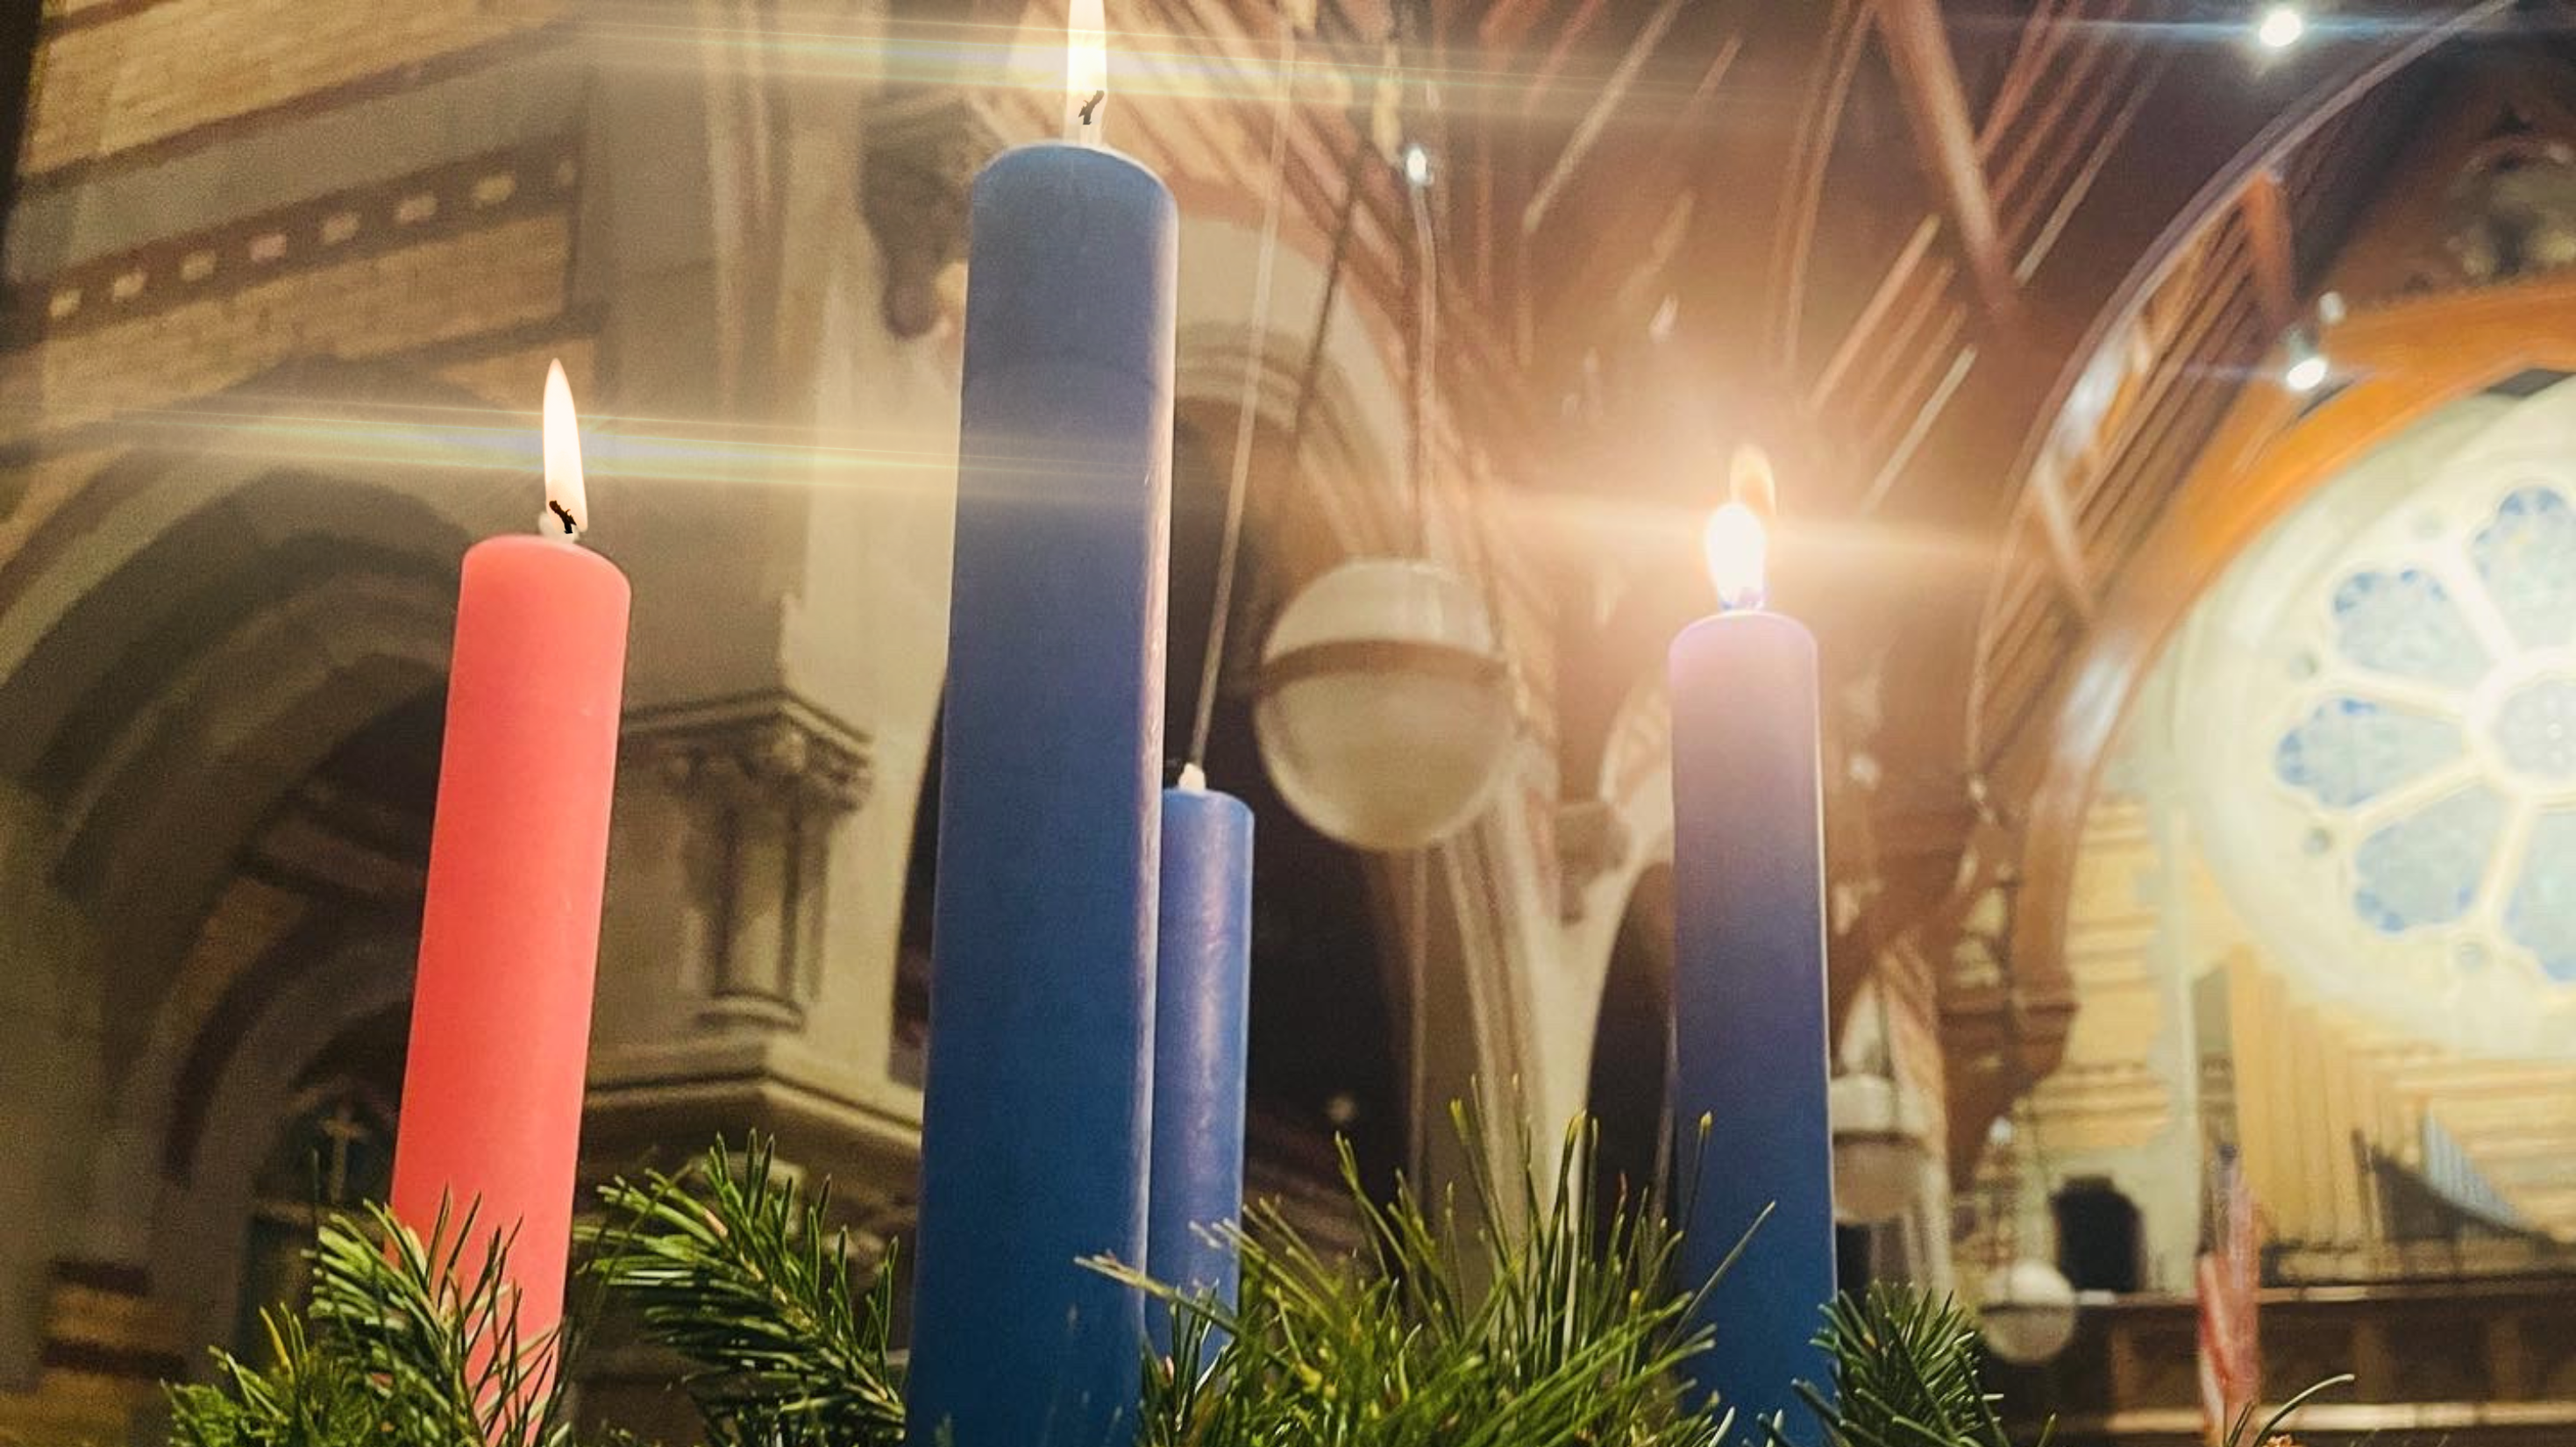 advent wreath with three lit candles